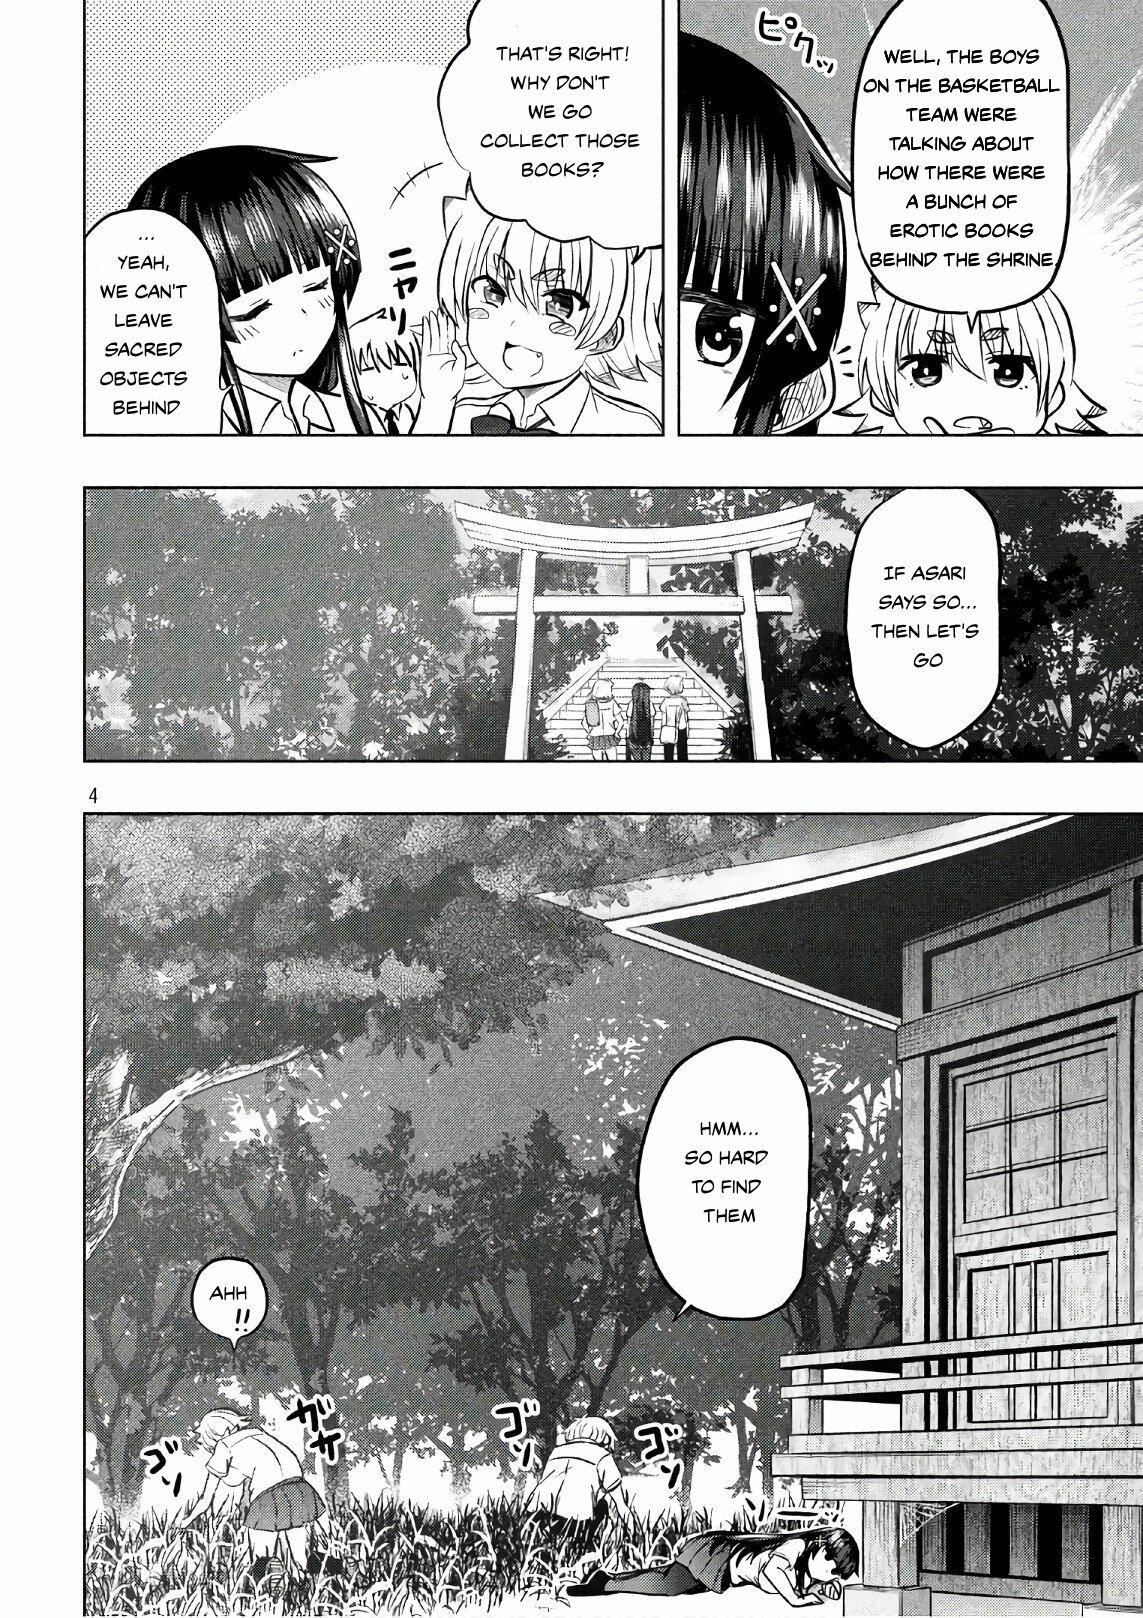 A Girl Who Is Very Well-Informed About Weird Knowledge, Takayukashiki Souko-San Chapter 25: Erotic Book page 4 - Mangakakalots.com